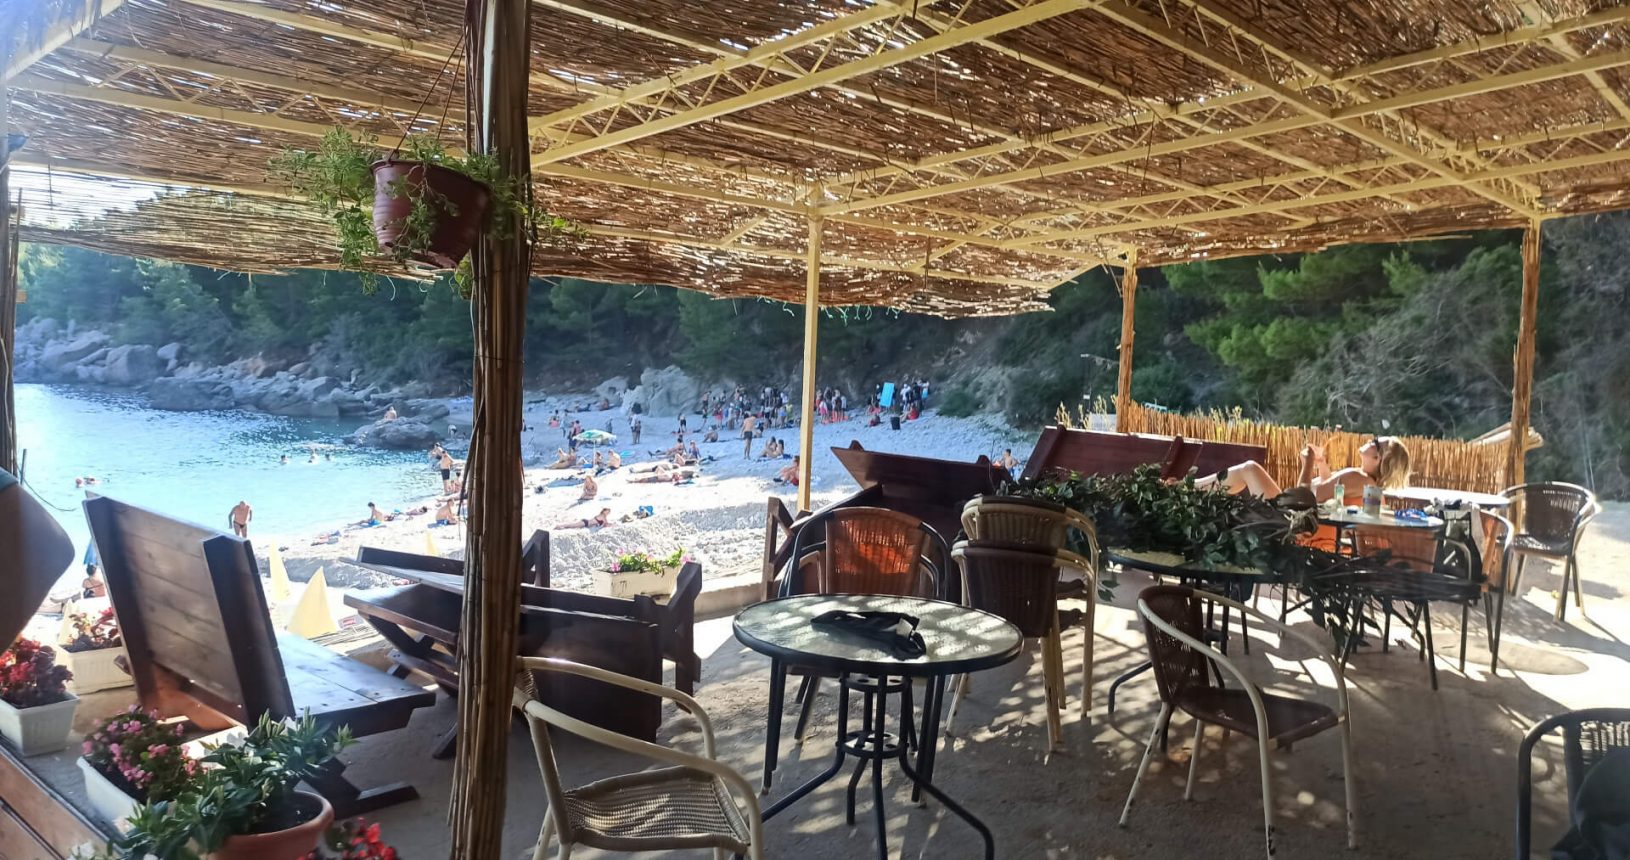 One side of cafe bar at Strbina Beach with the view